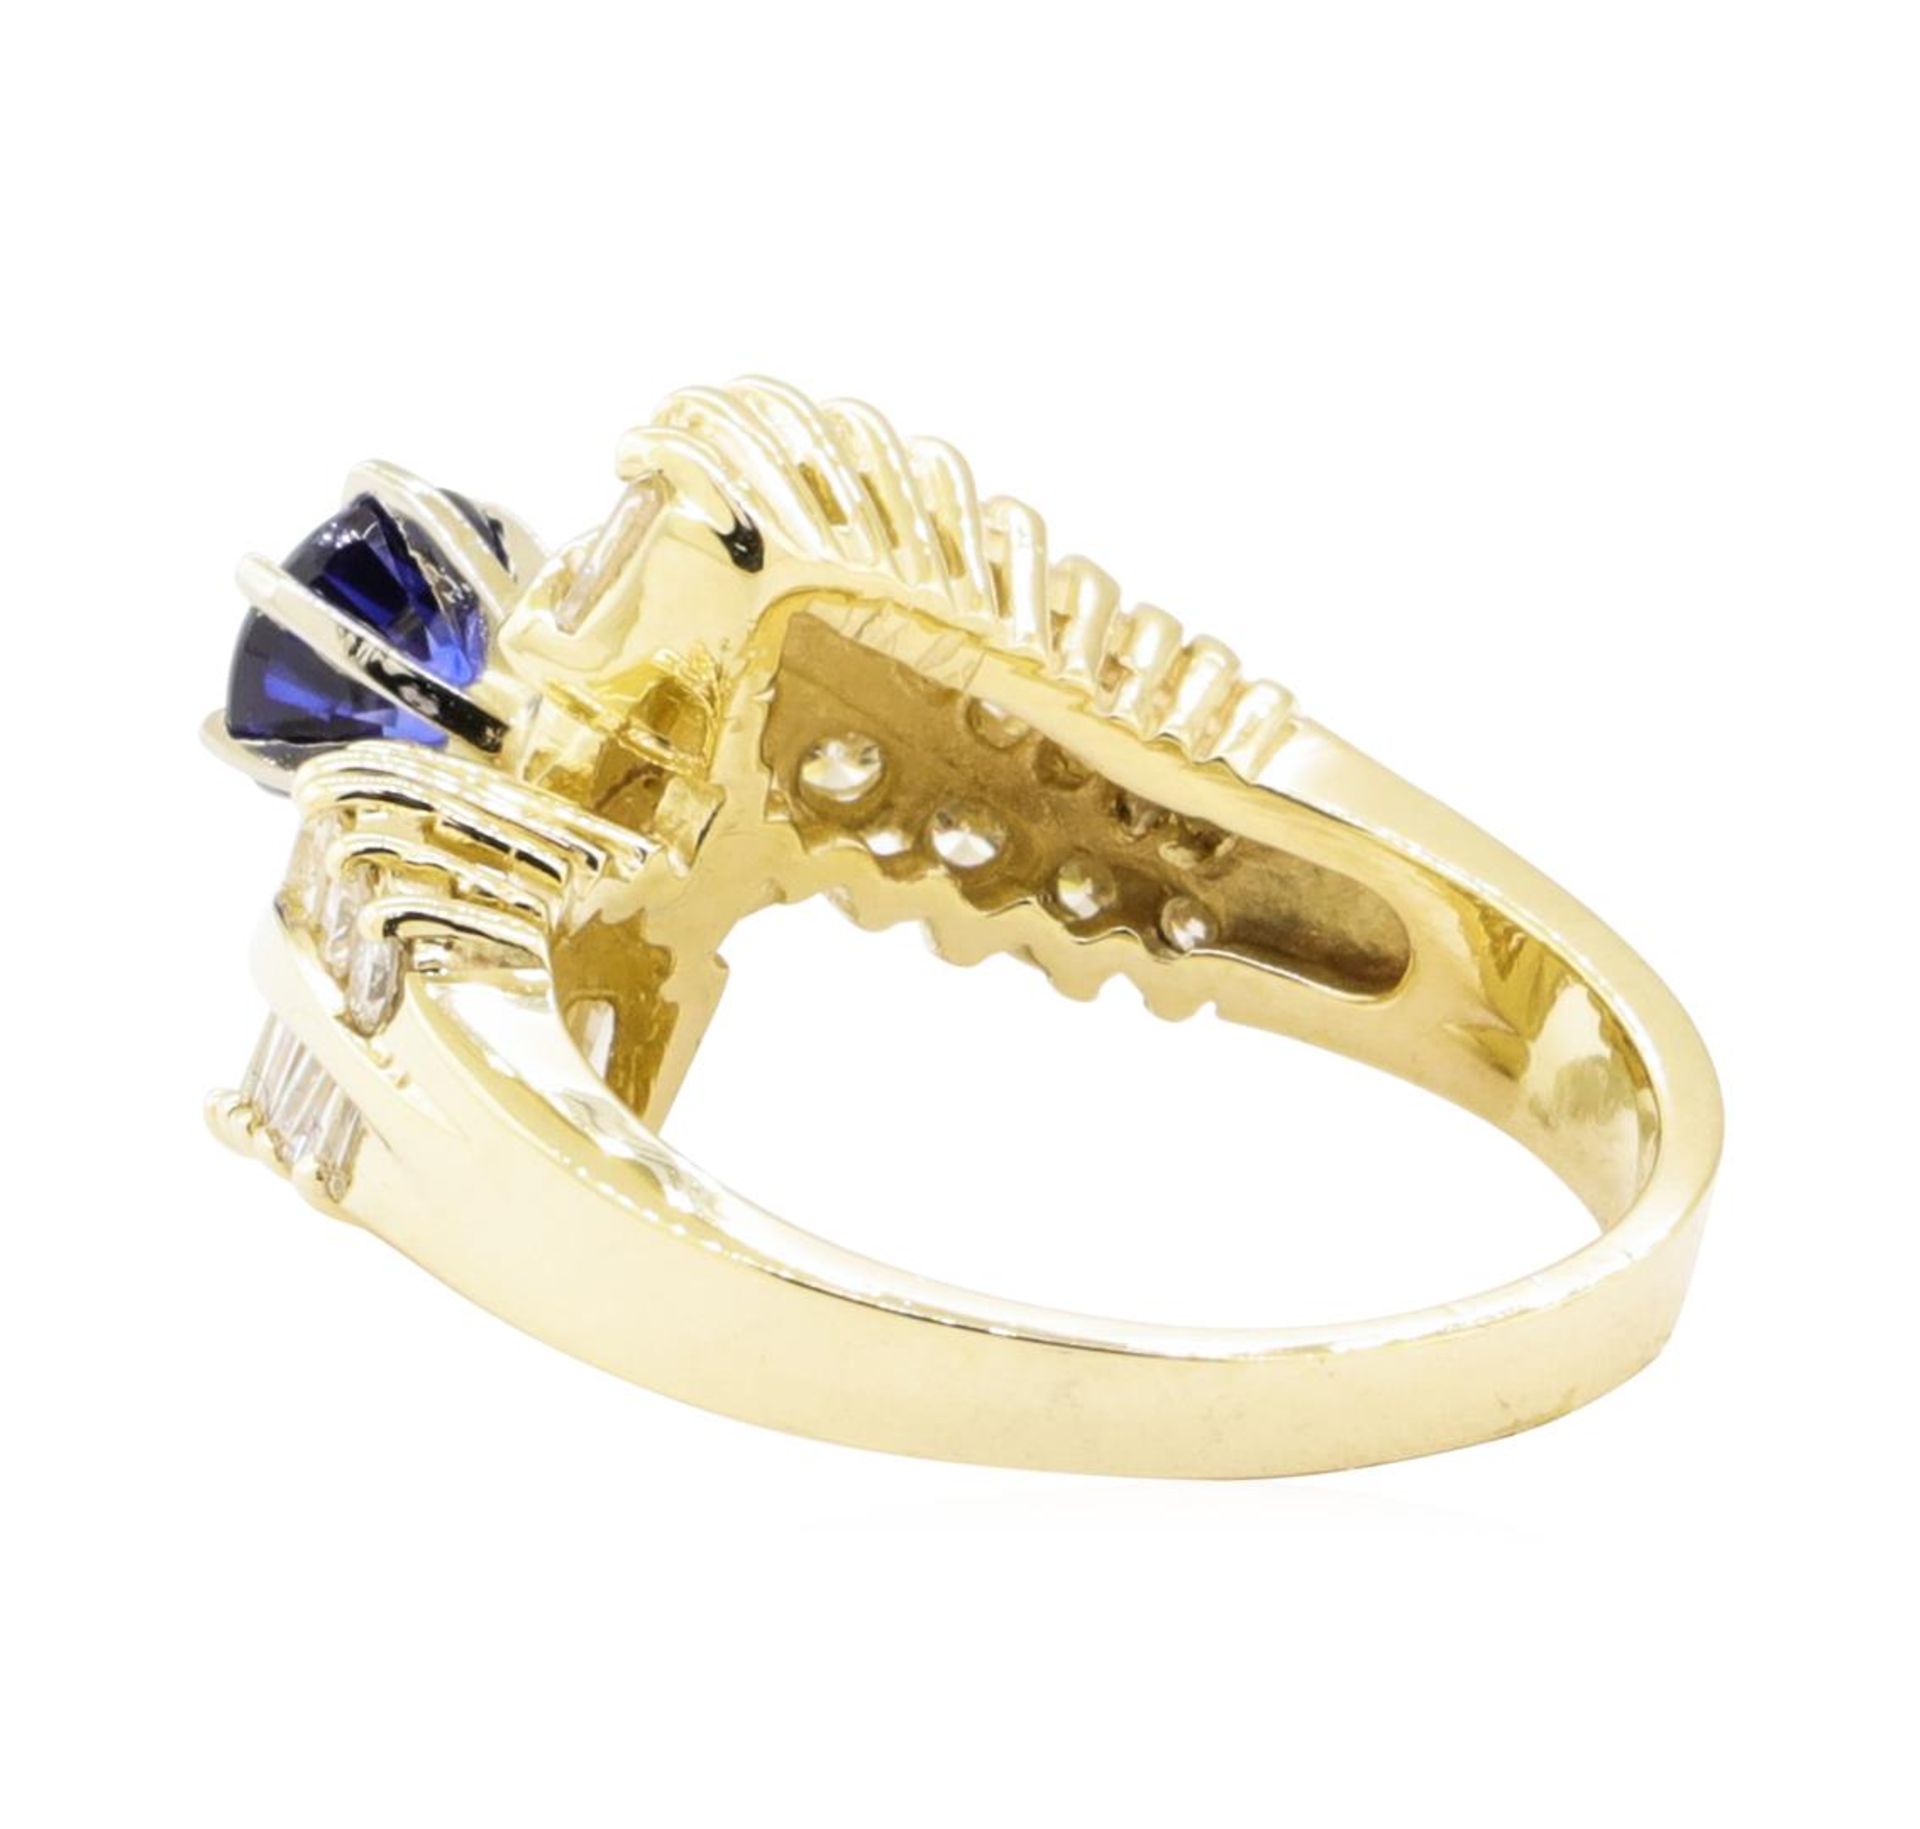 2.03 ctw Blue Sapphire And Diamond Ring - 14KT Yellow Gold - Image 3 of 5